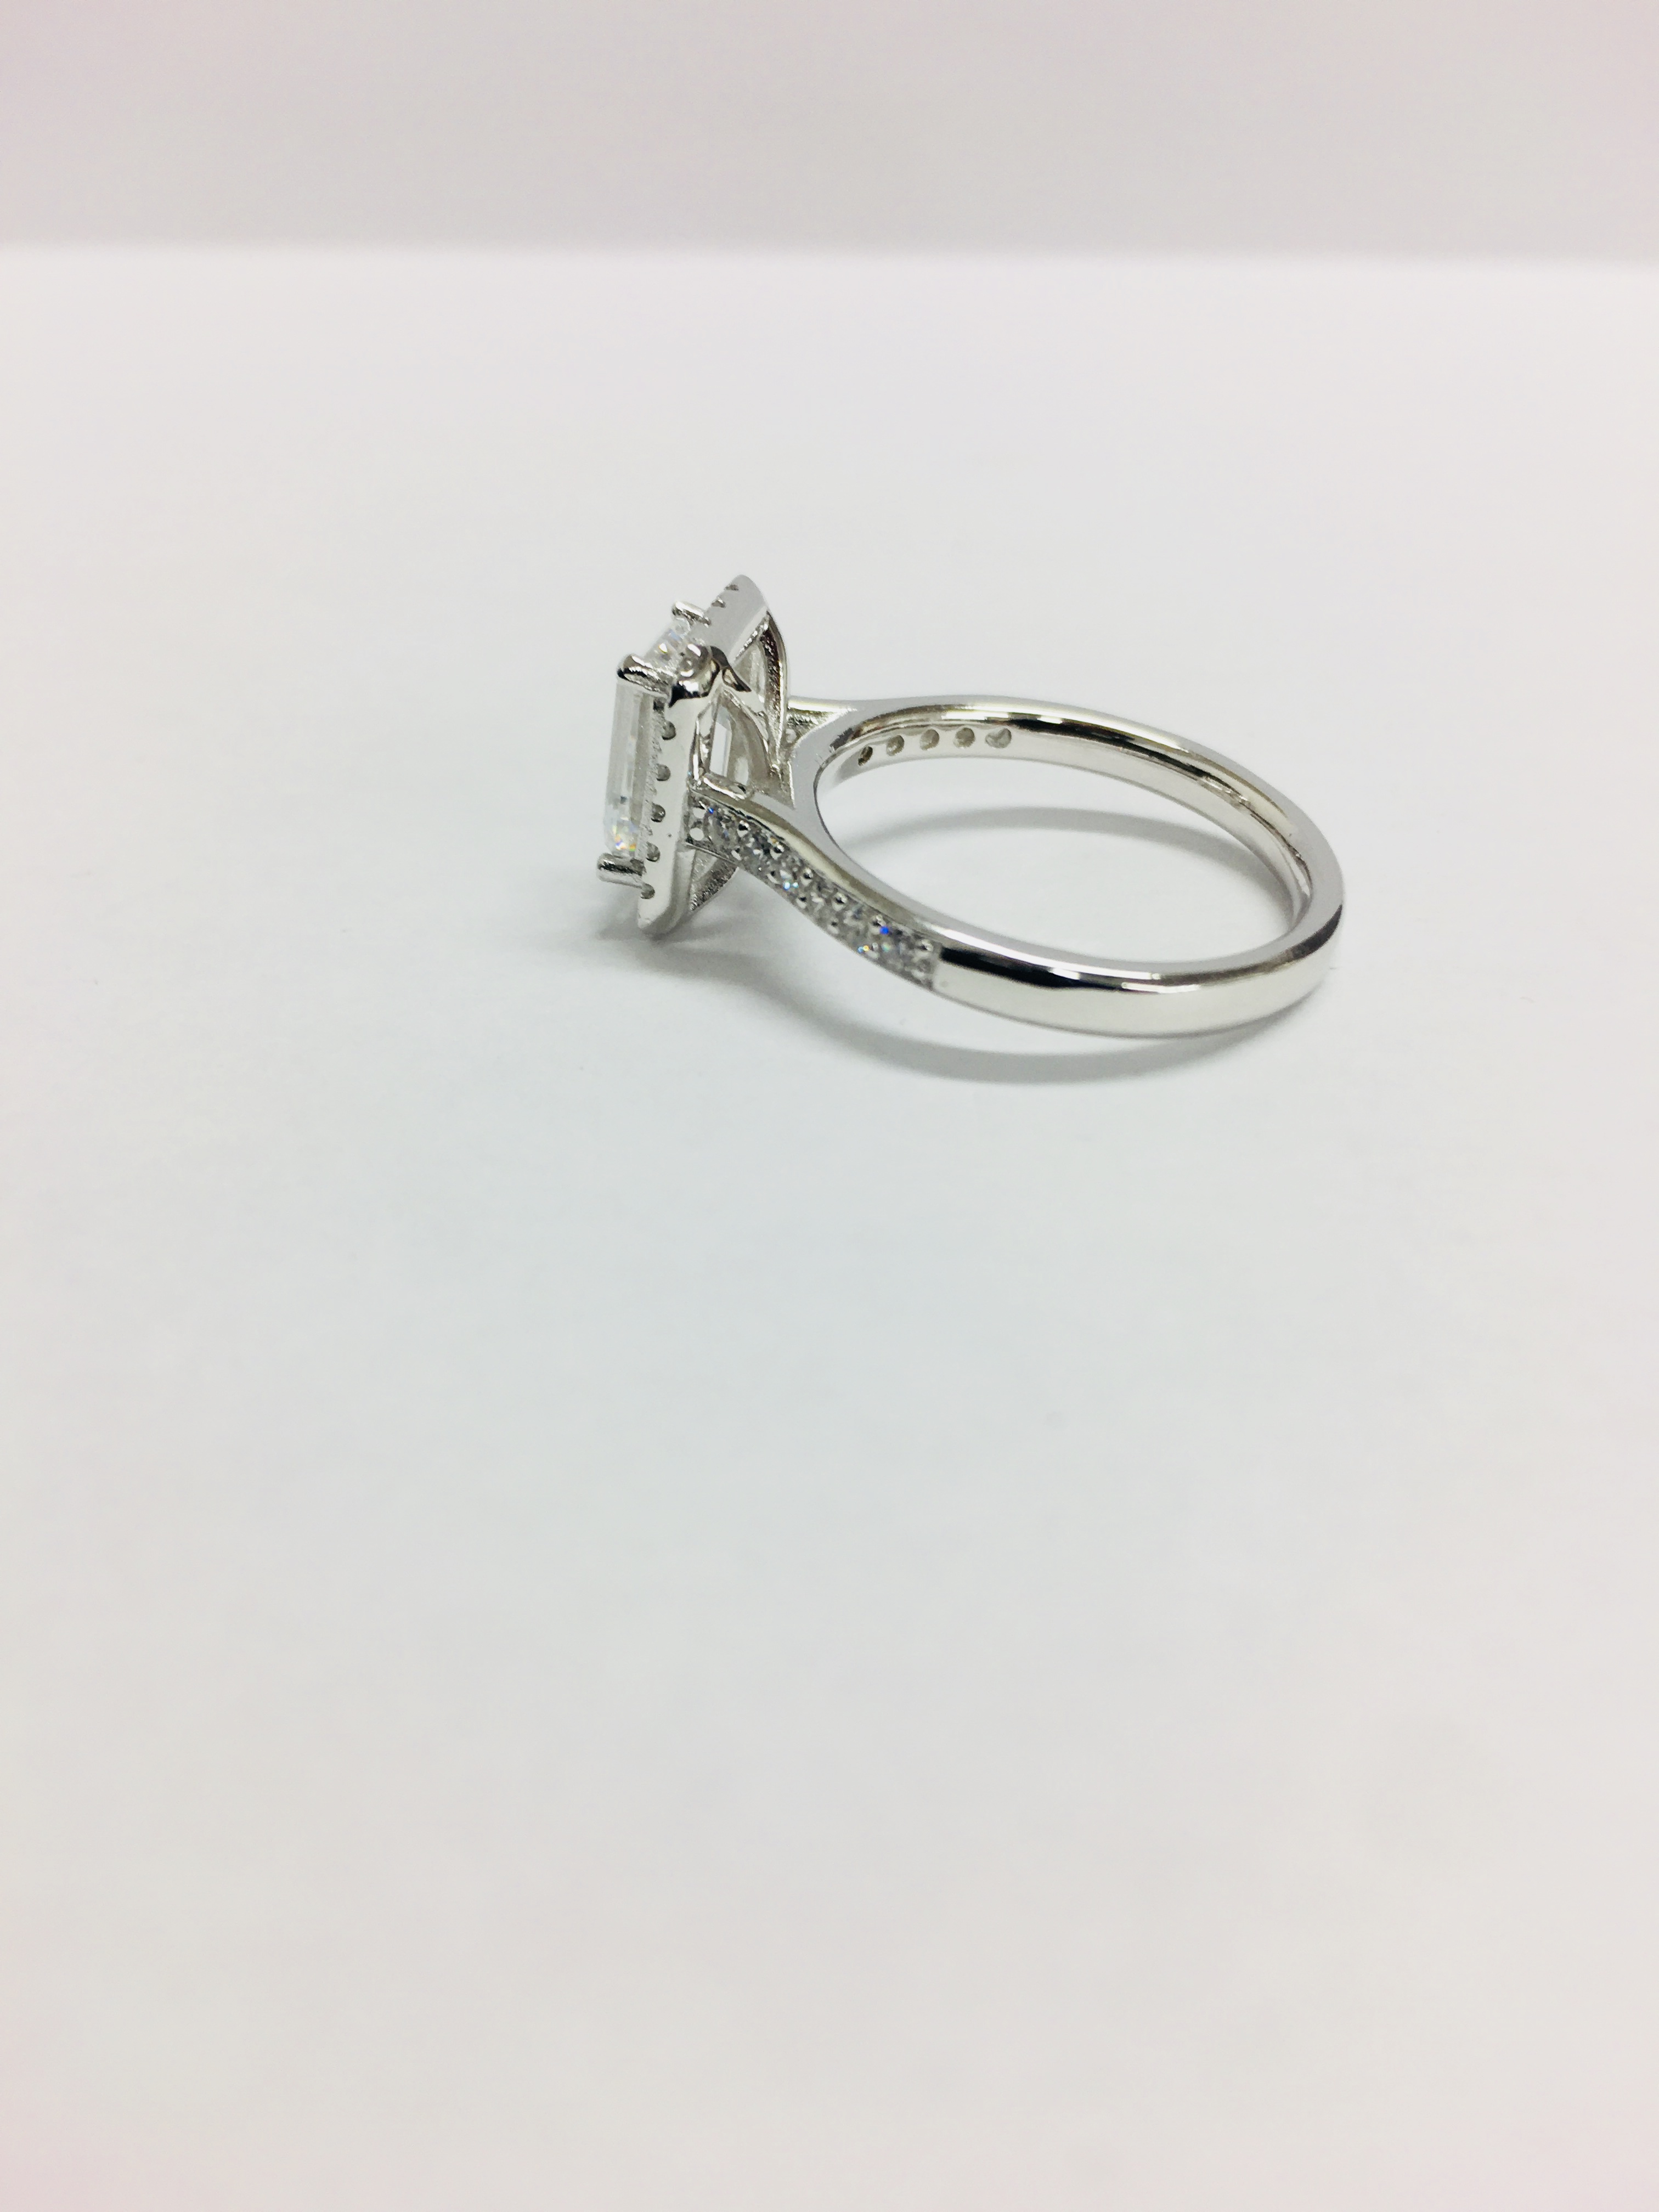 1.2ct diamond solitaire ring set with an emerald cut diamond - Image 4 of 8